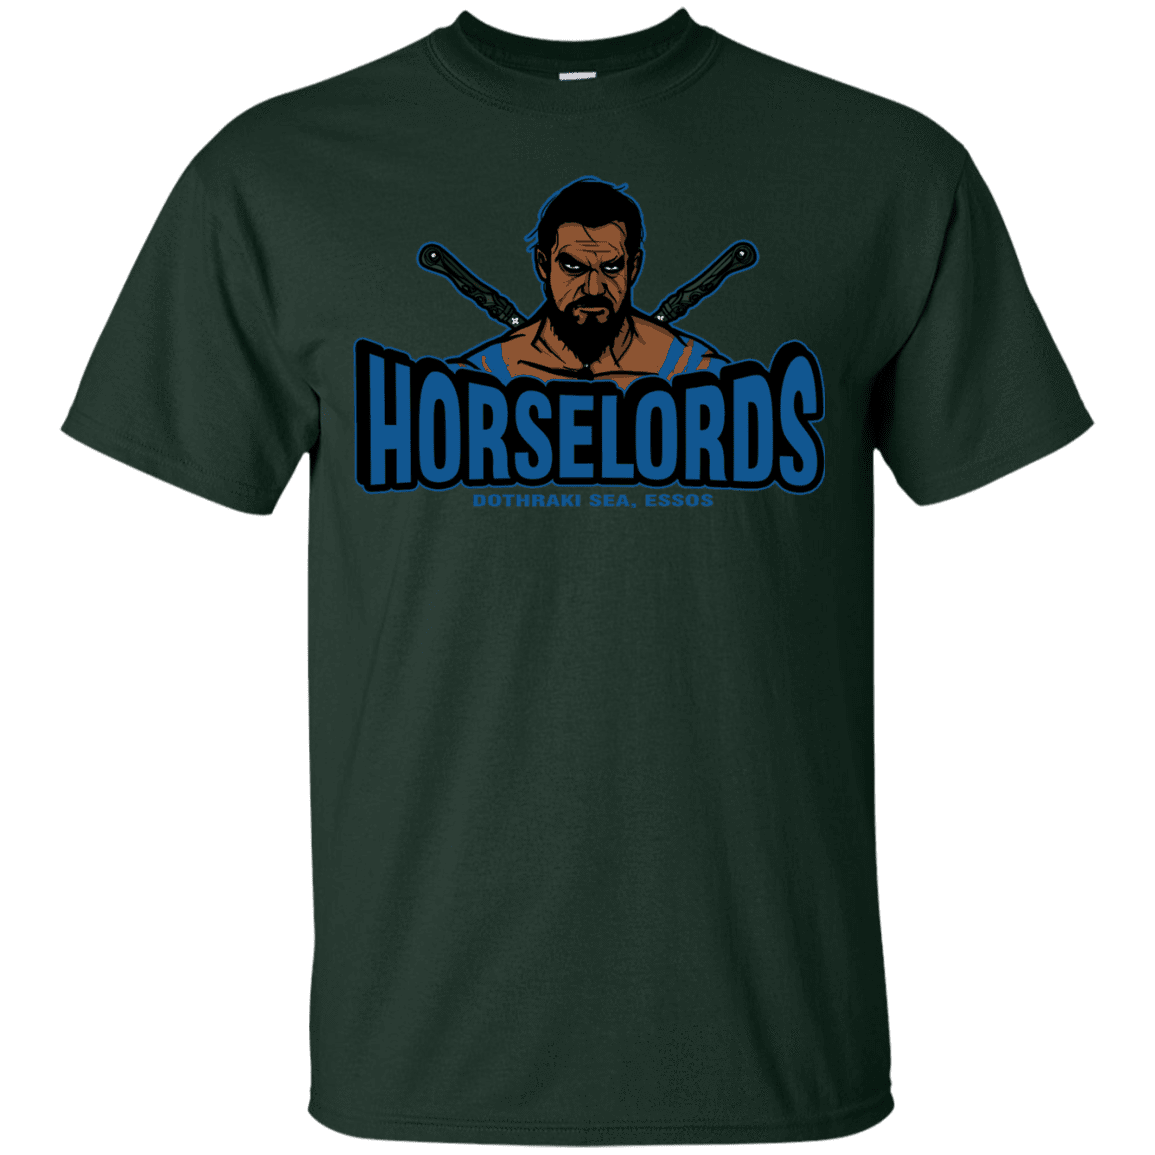 T-Shirts Forest / S Horse Lords T-Shirt